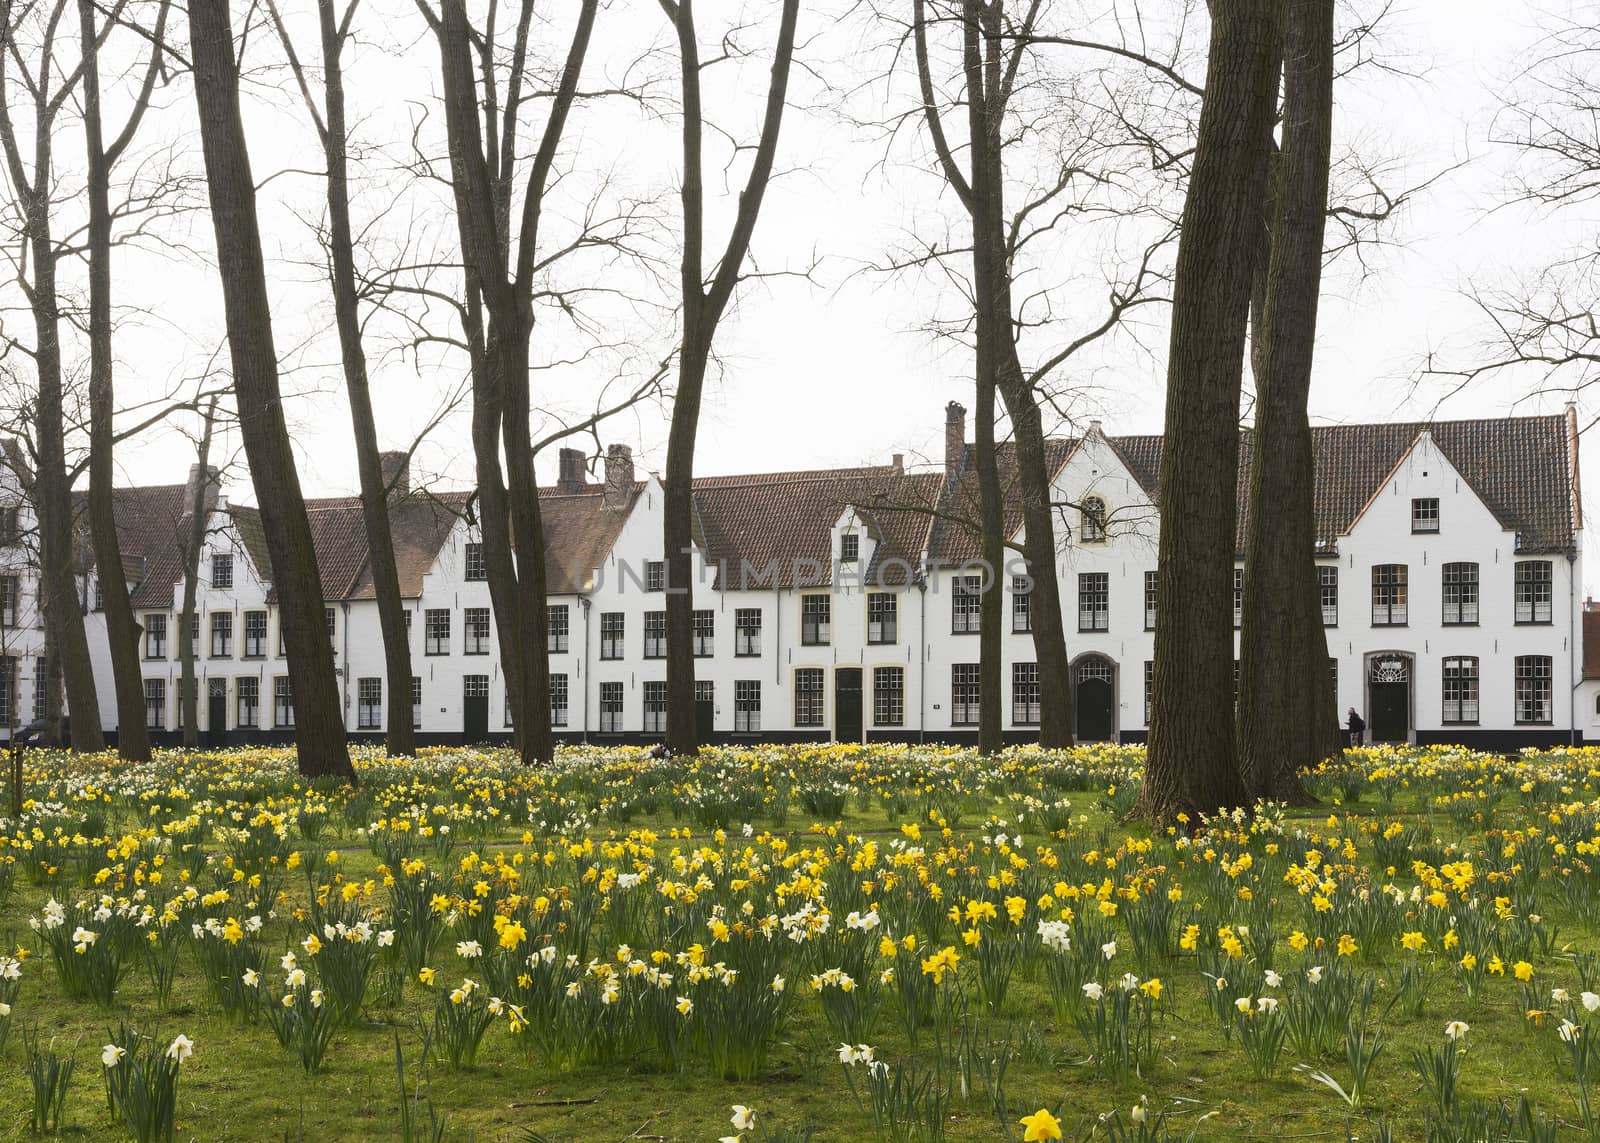 Beguinage of Bruges and daffodils in early spring 2014.